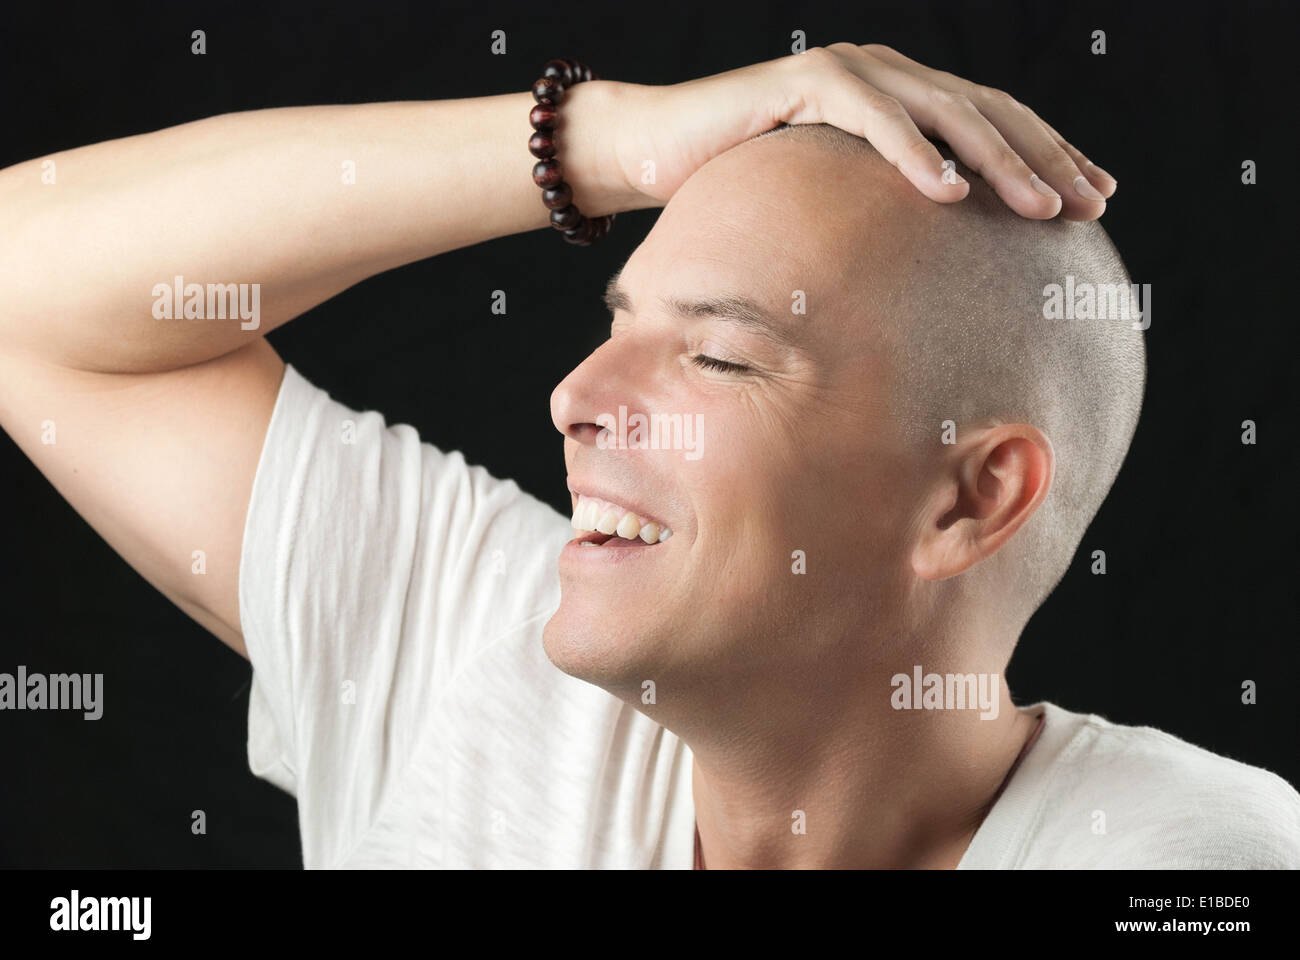 Close-up of a man feeling his newly shaved head. Stock Photo